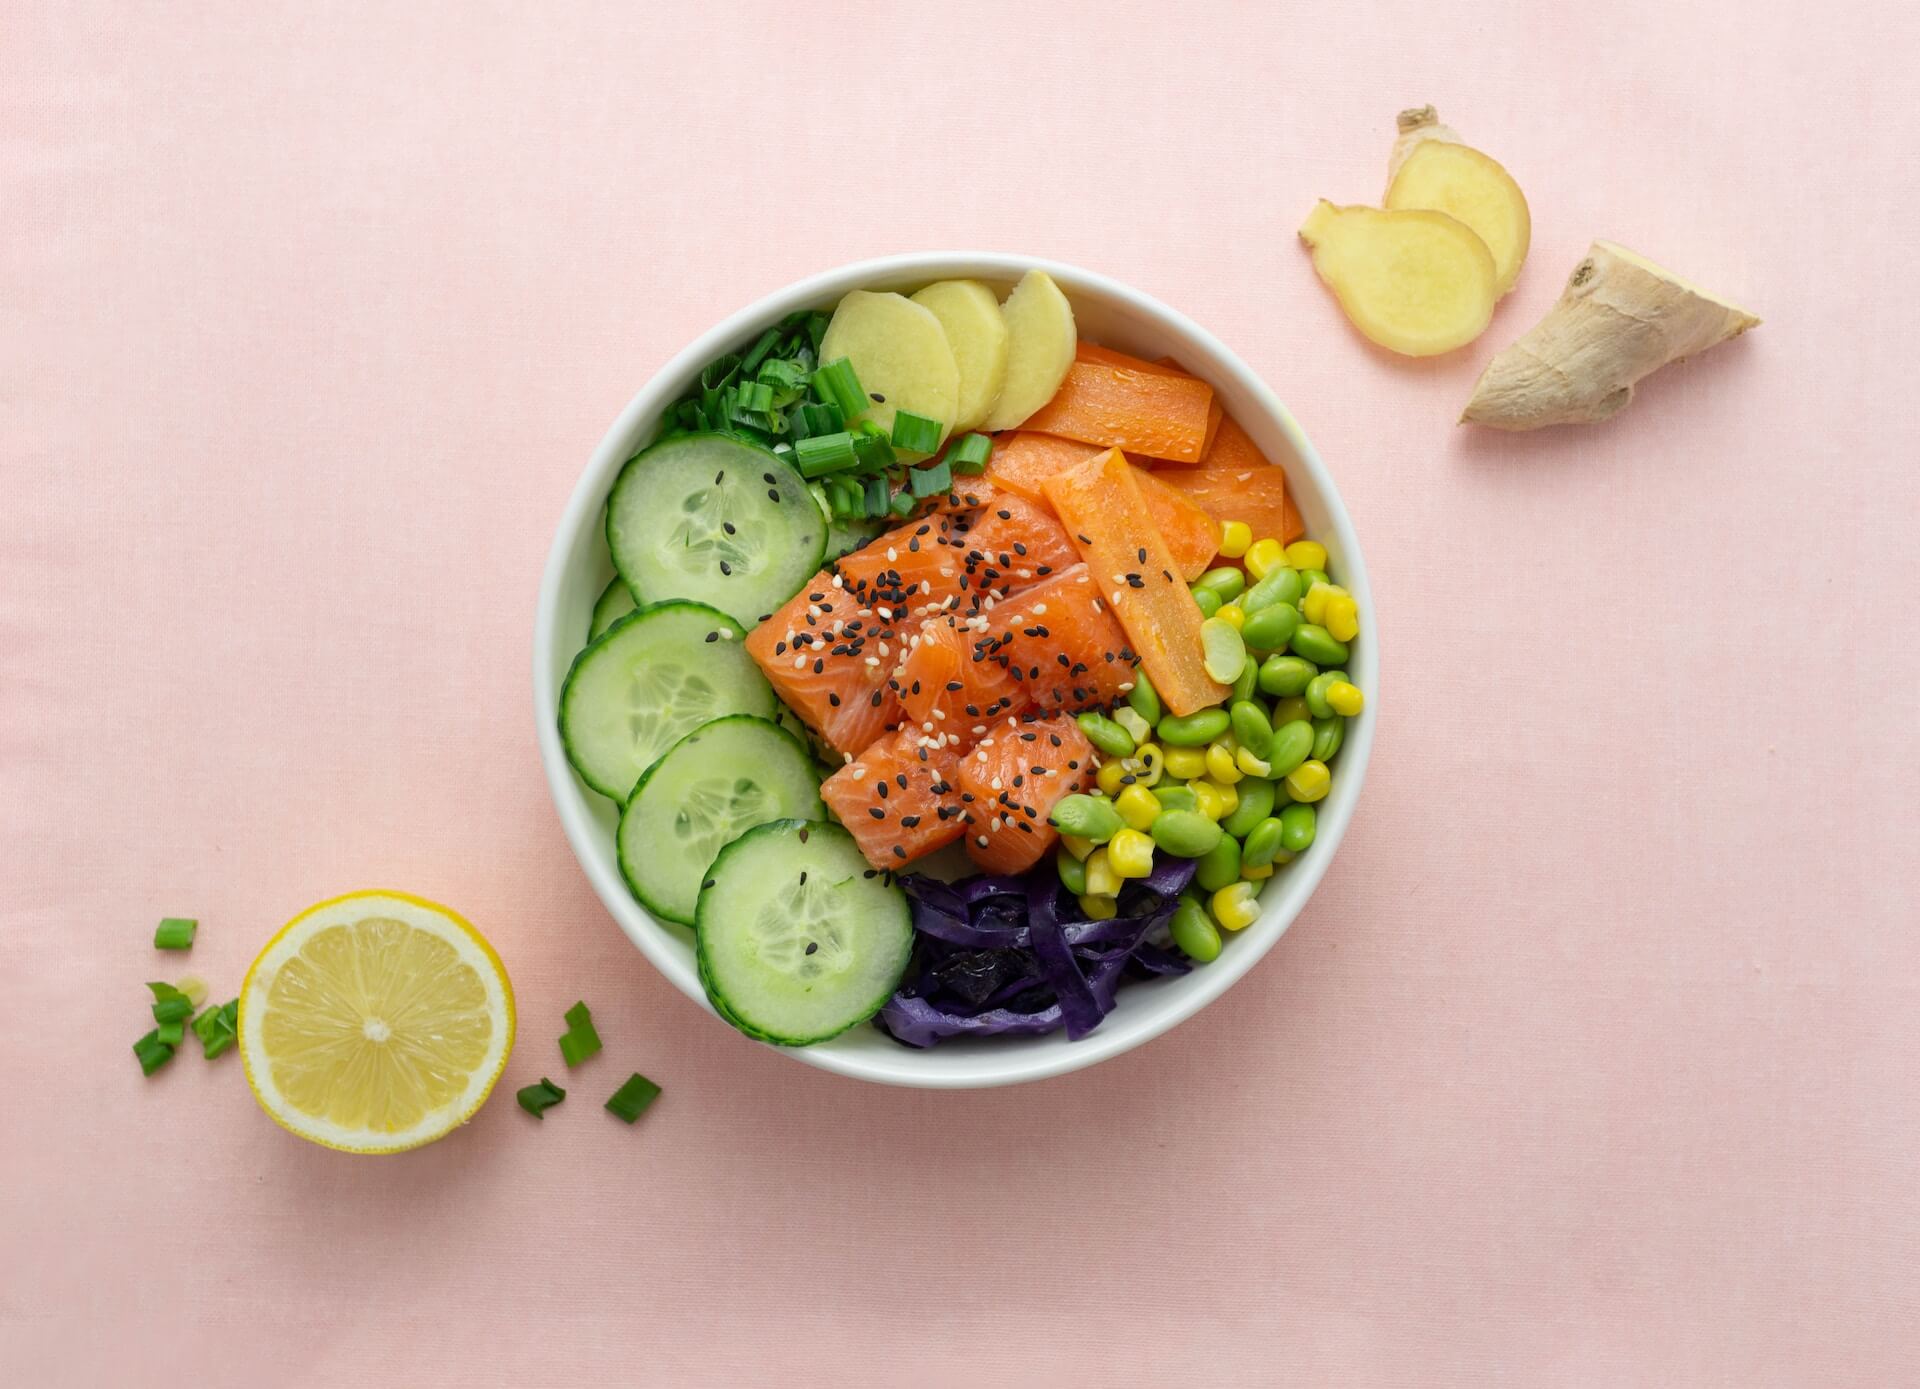 Visual representation highlighting the health benefits of eating poke bowls, possibly with icons or bullet points.
